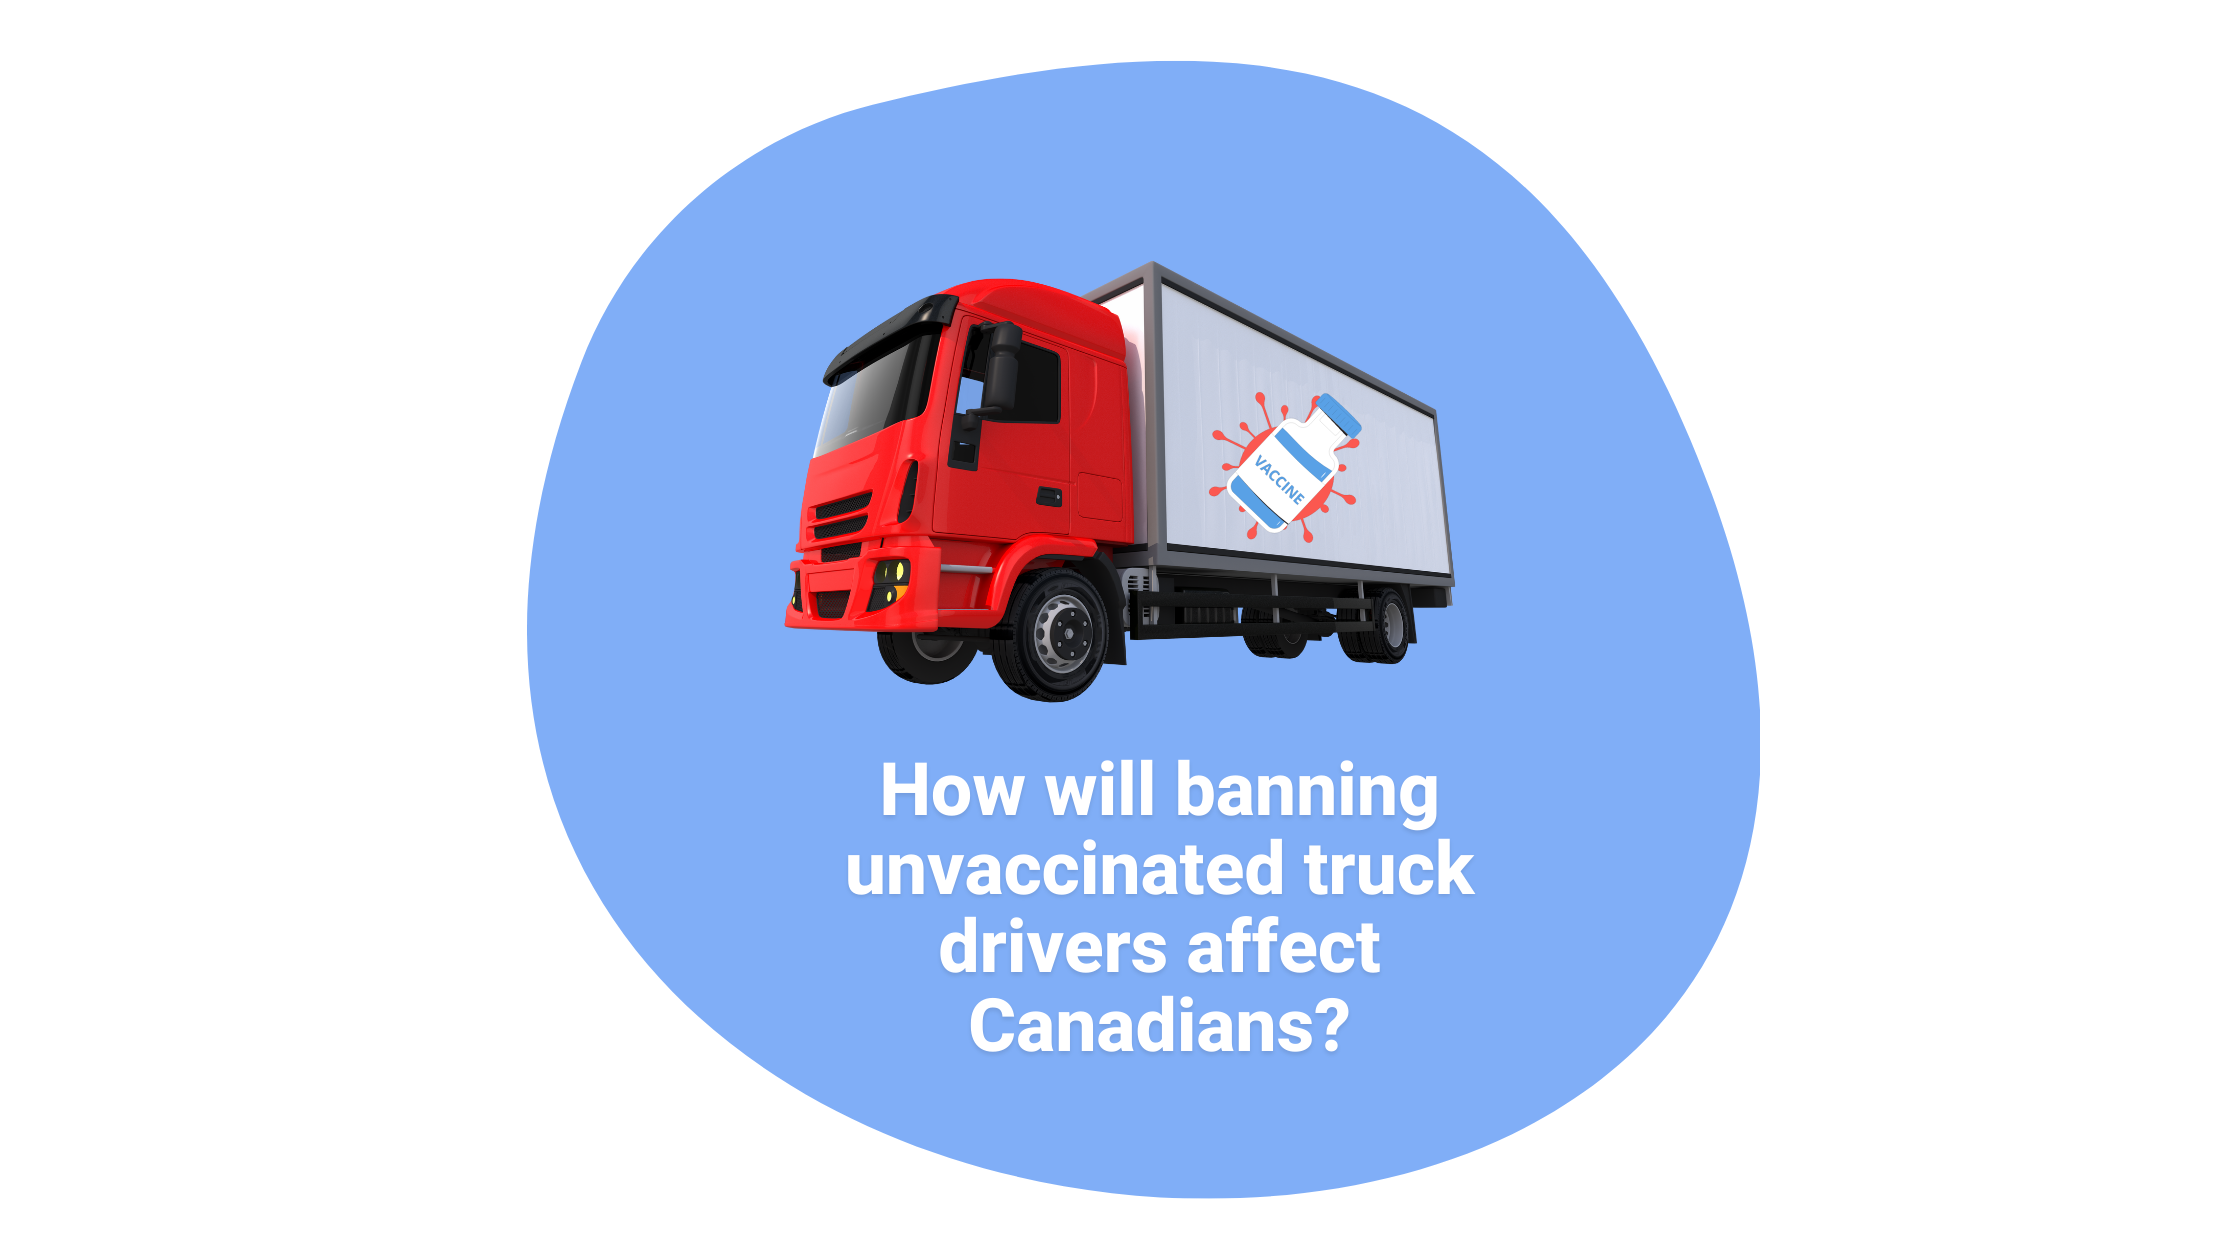 How will banning unvaccinated truck drivers affect Canadians?